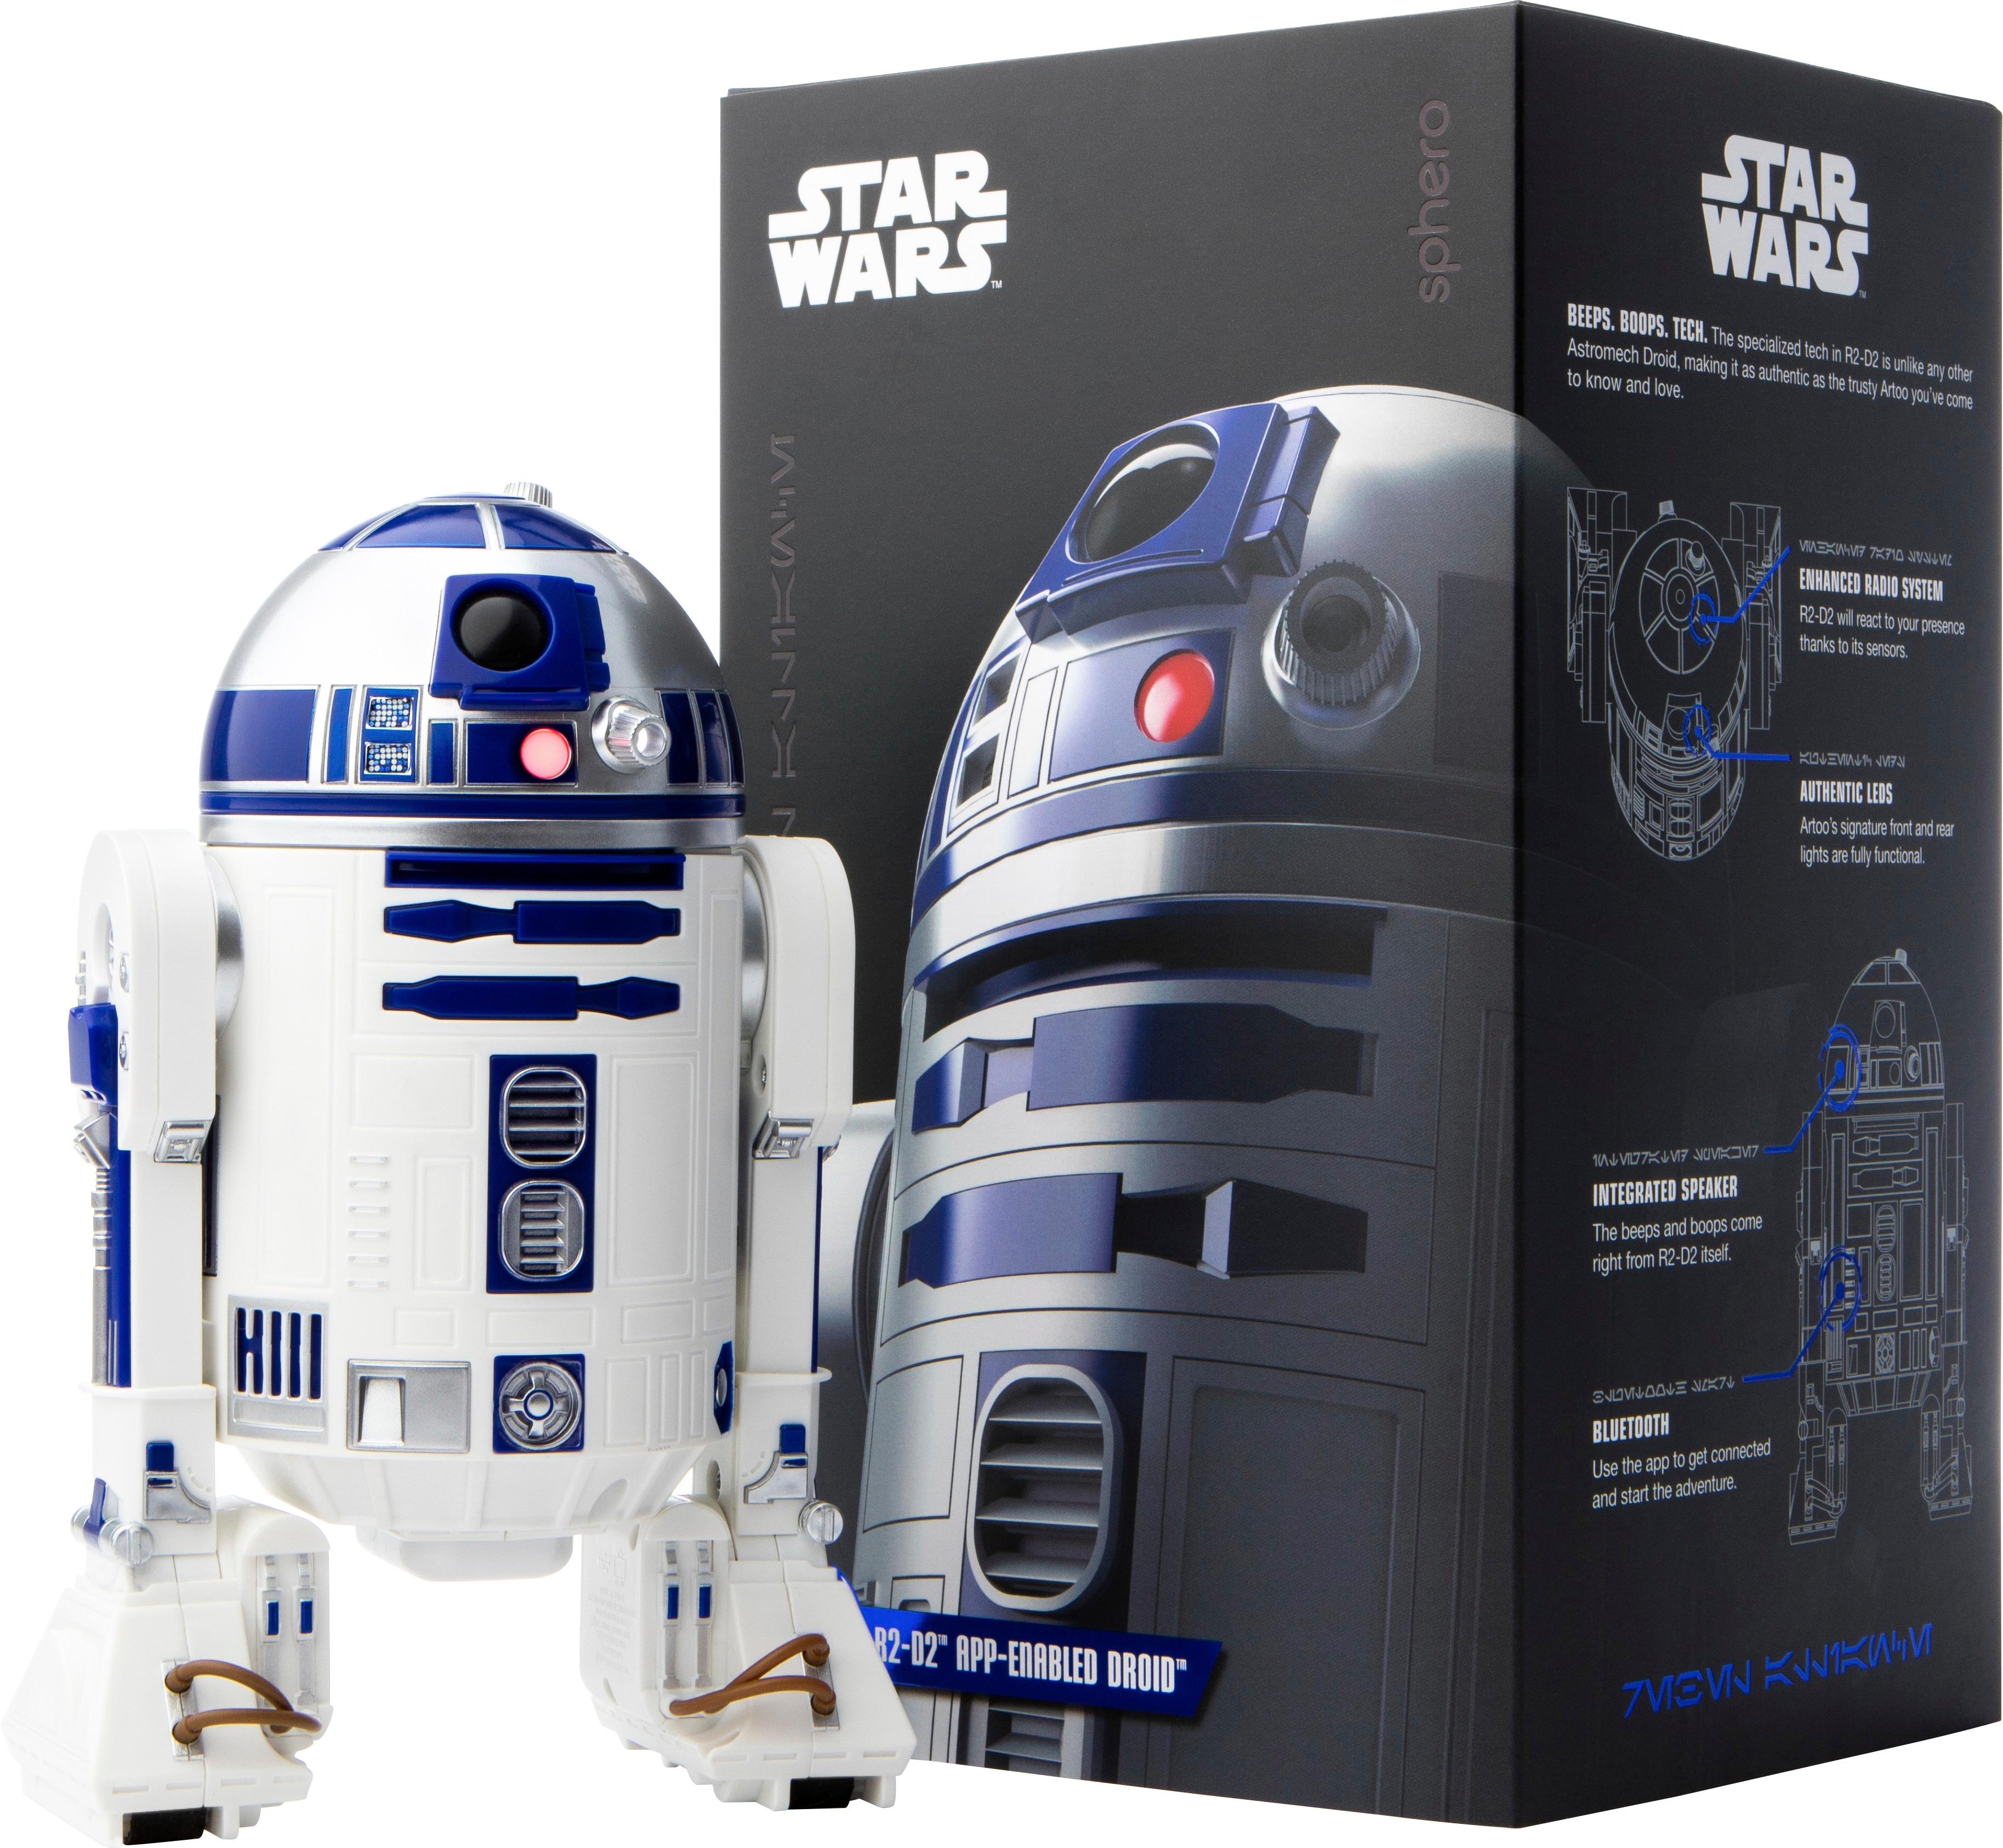 Star Wars Robot Holographic Simulation R2-D2 App-Enabled Droid LED Speakers 